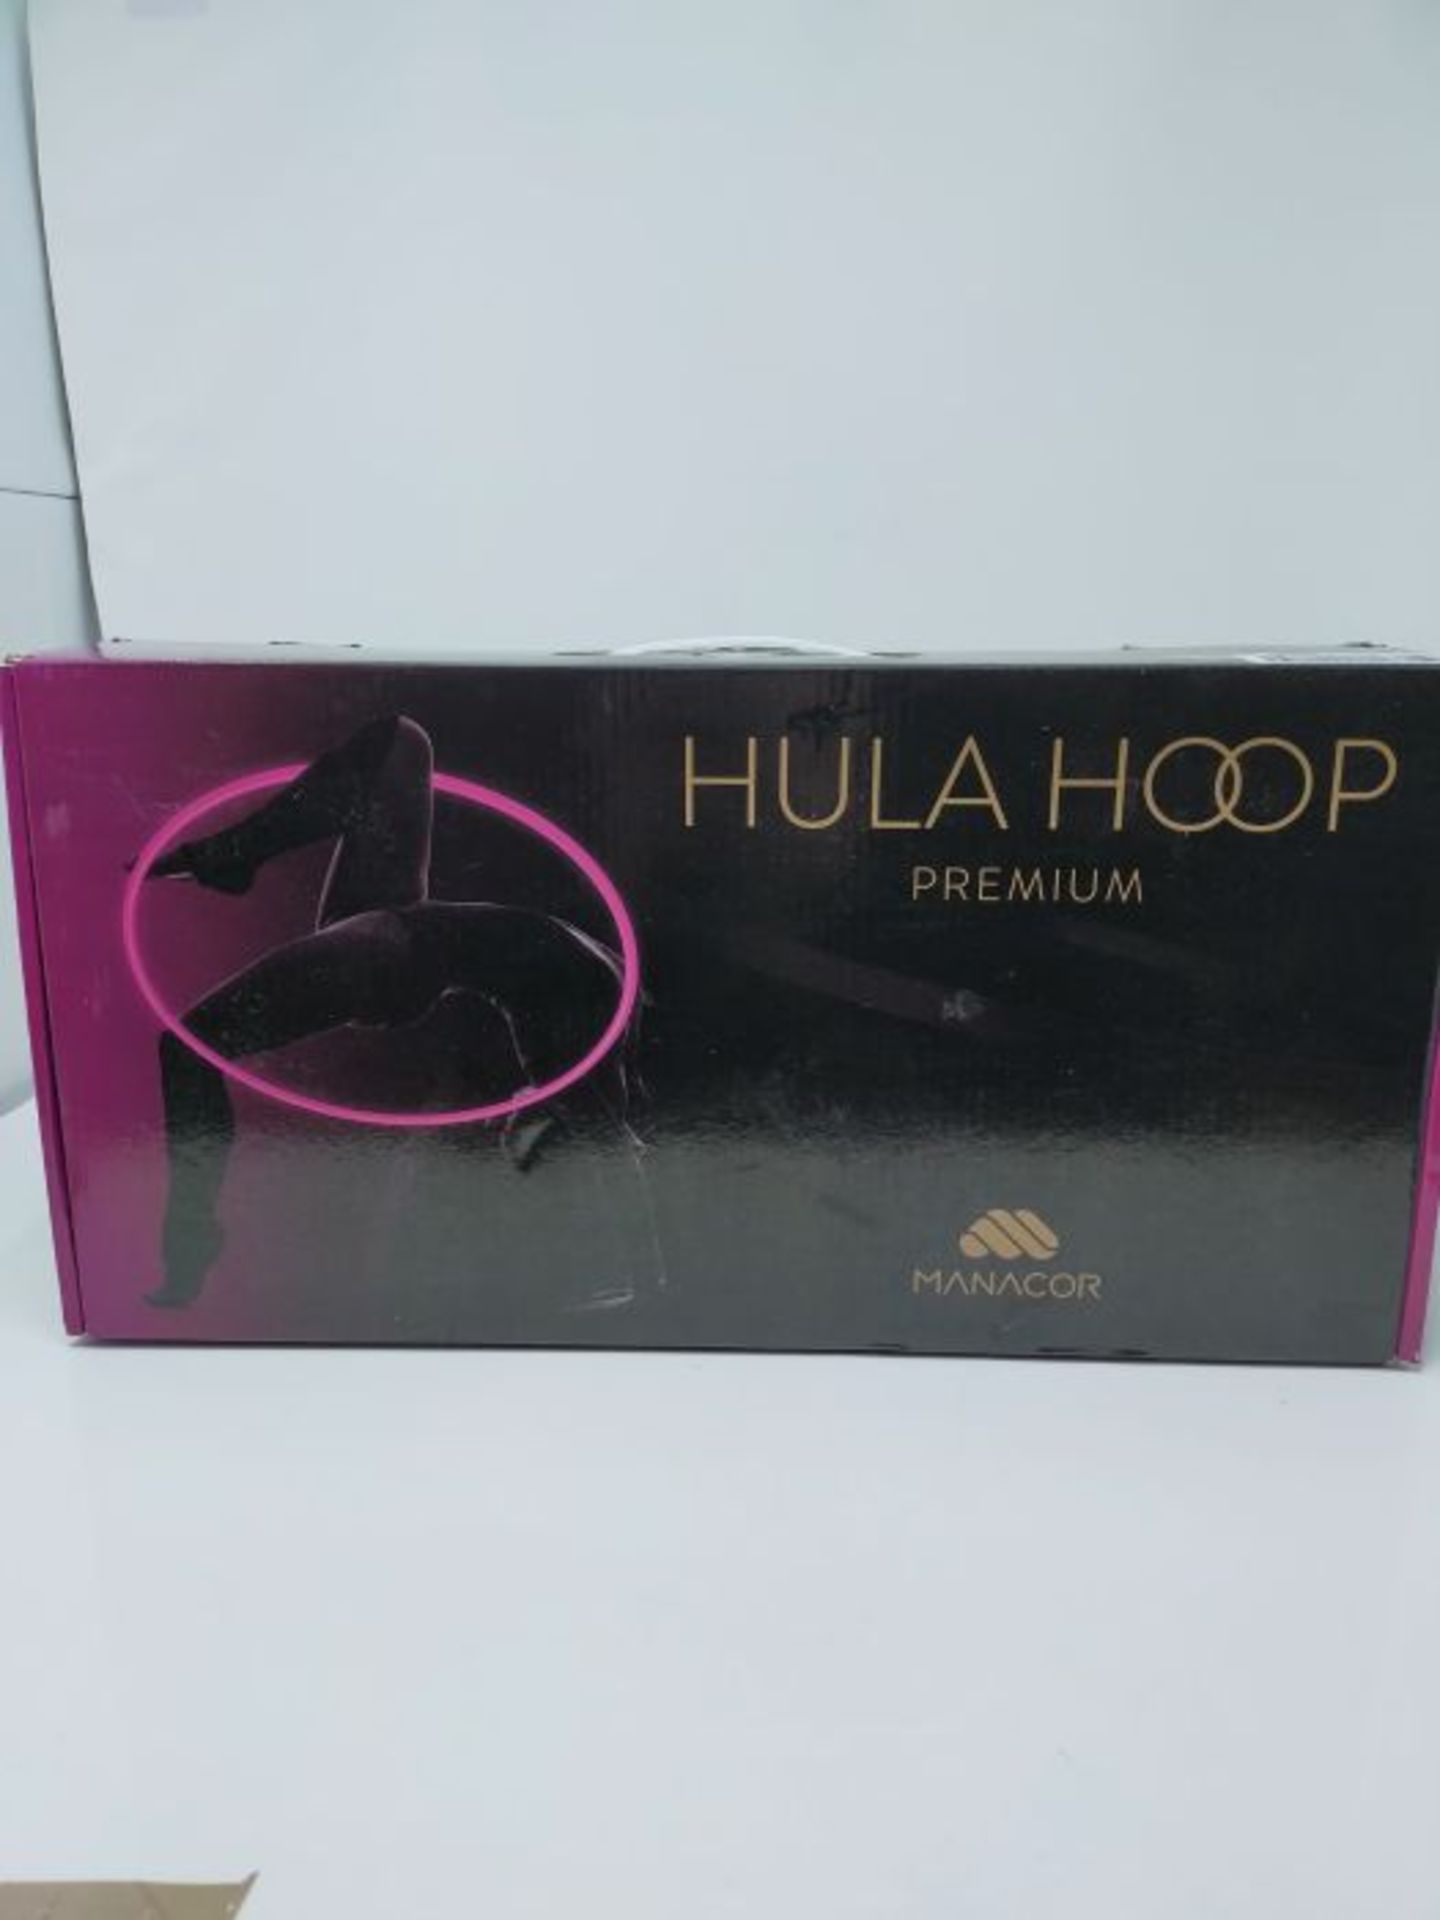 Manacor Hula Hoop for Adults & Children for Weight Loss and Massage, A 6-8 Piece Remov - Image 2 of 3